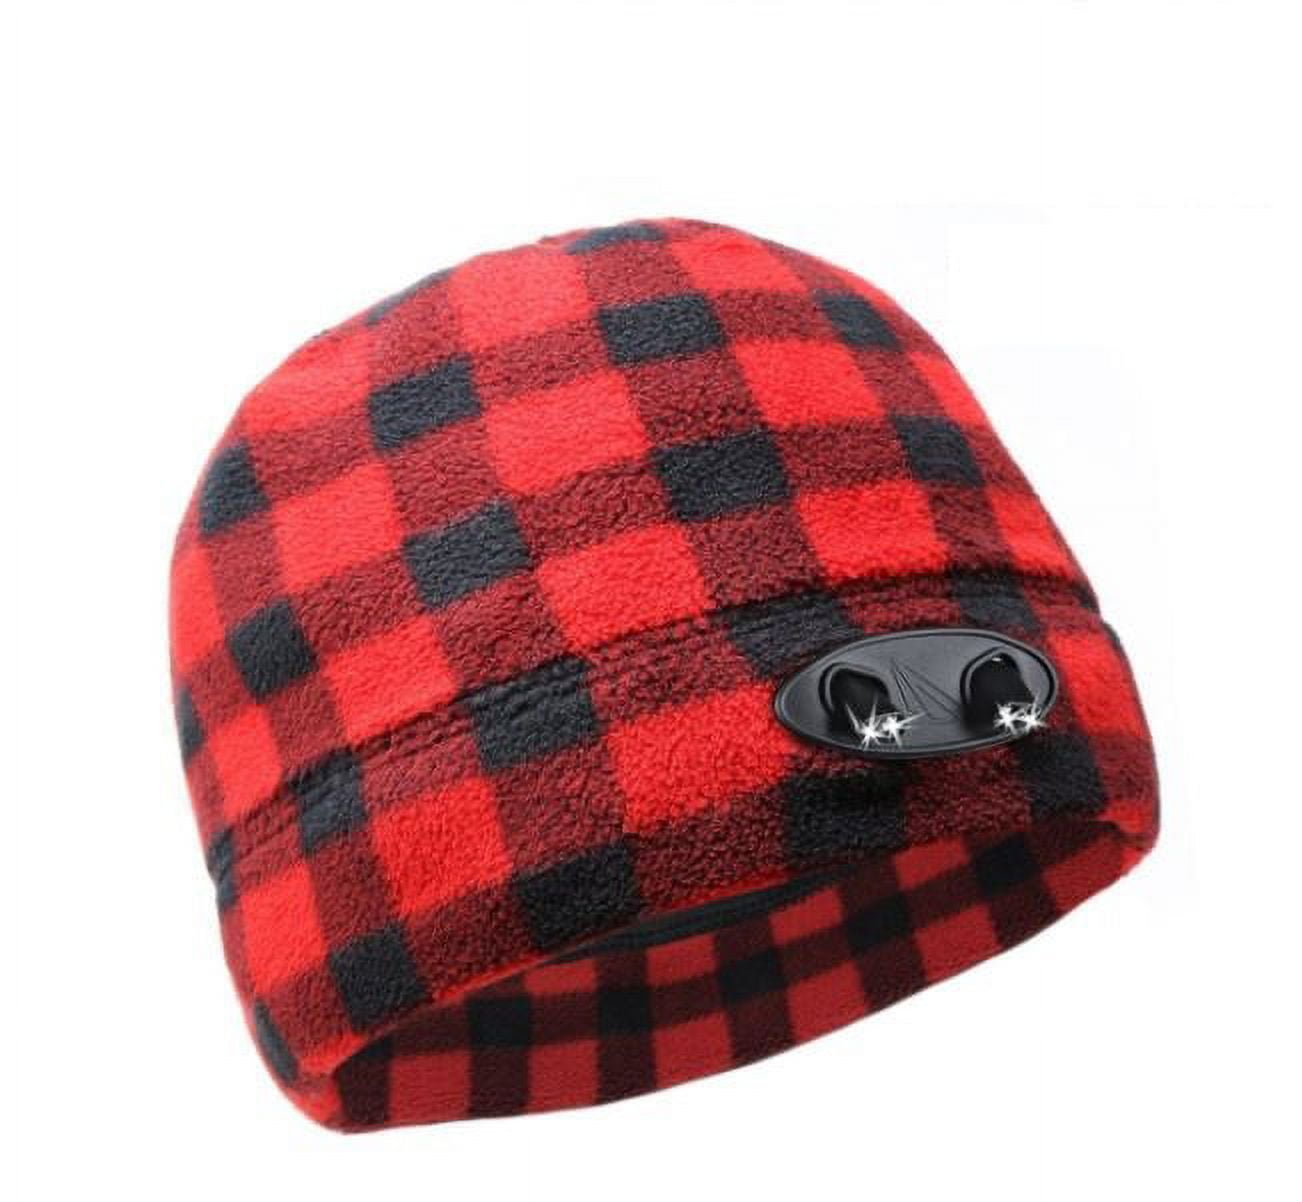 Panther Vision POWERCAP LED Beanie Cap 35/55 Ultra-Bright Hands Free LED  Lighted Battery Powered Headlamp Hat Plaid Red  Black (CUBWB-5505) 